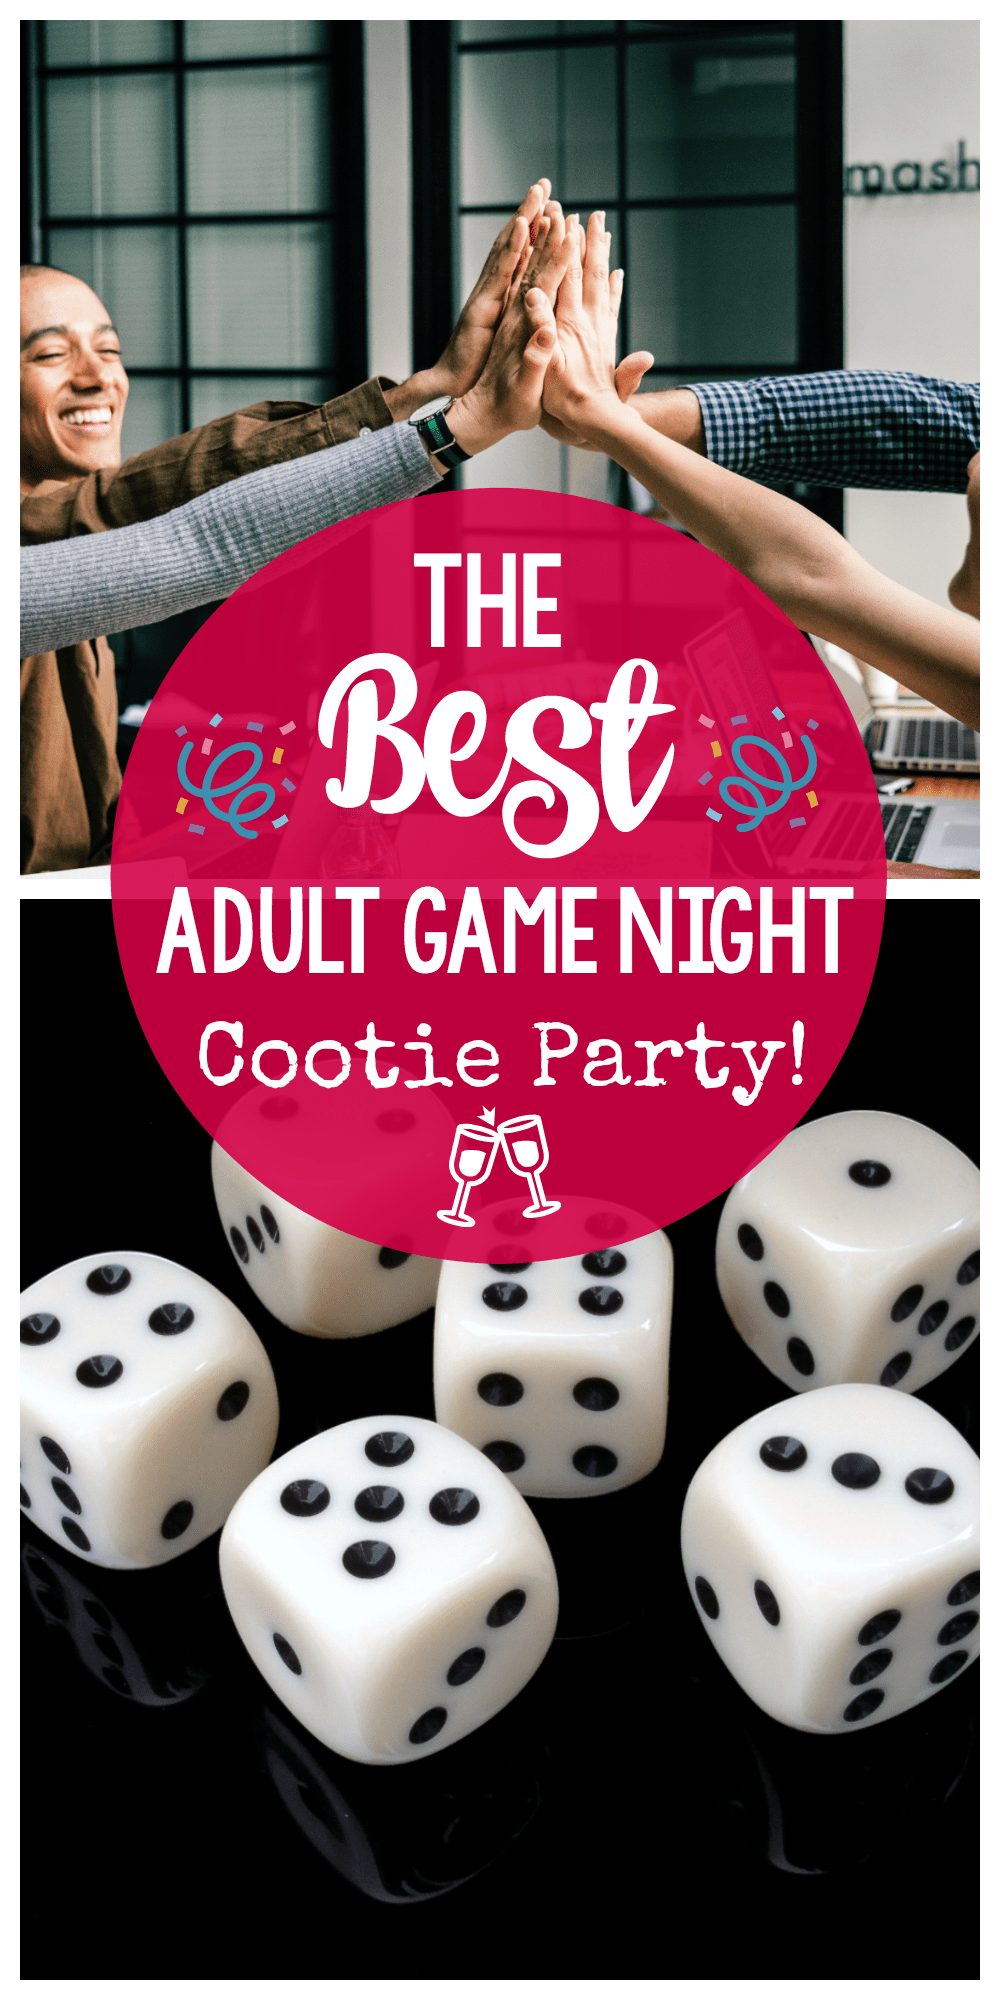 Dice Games for Adults: How to Throw a Cootie Party